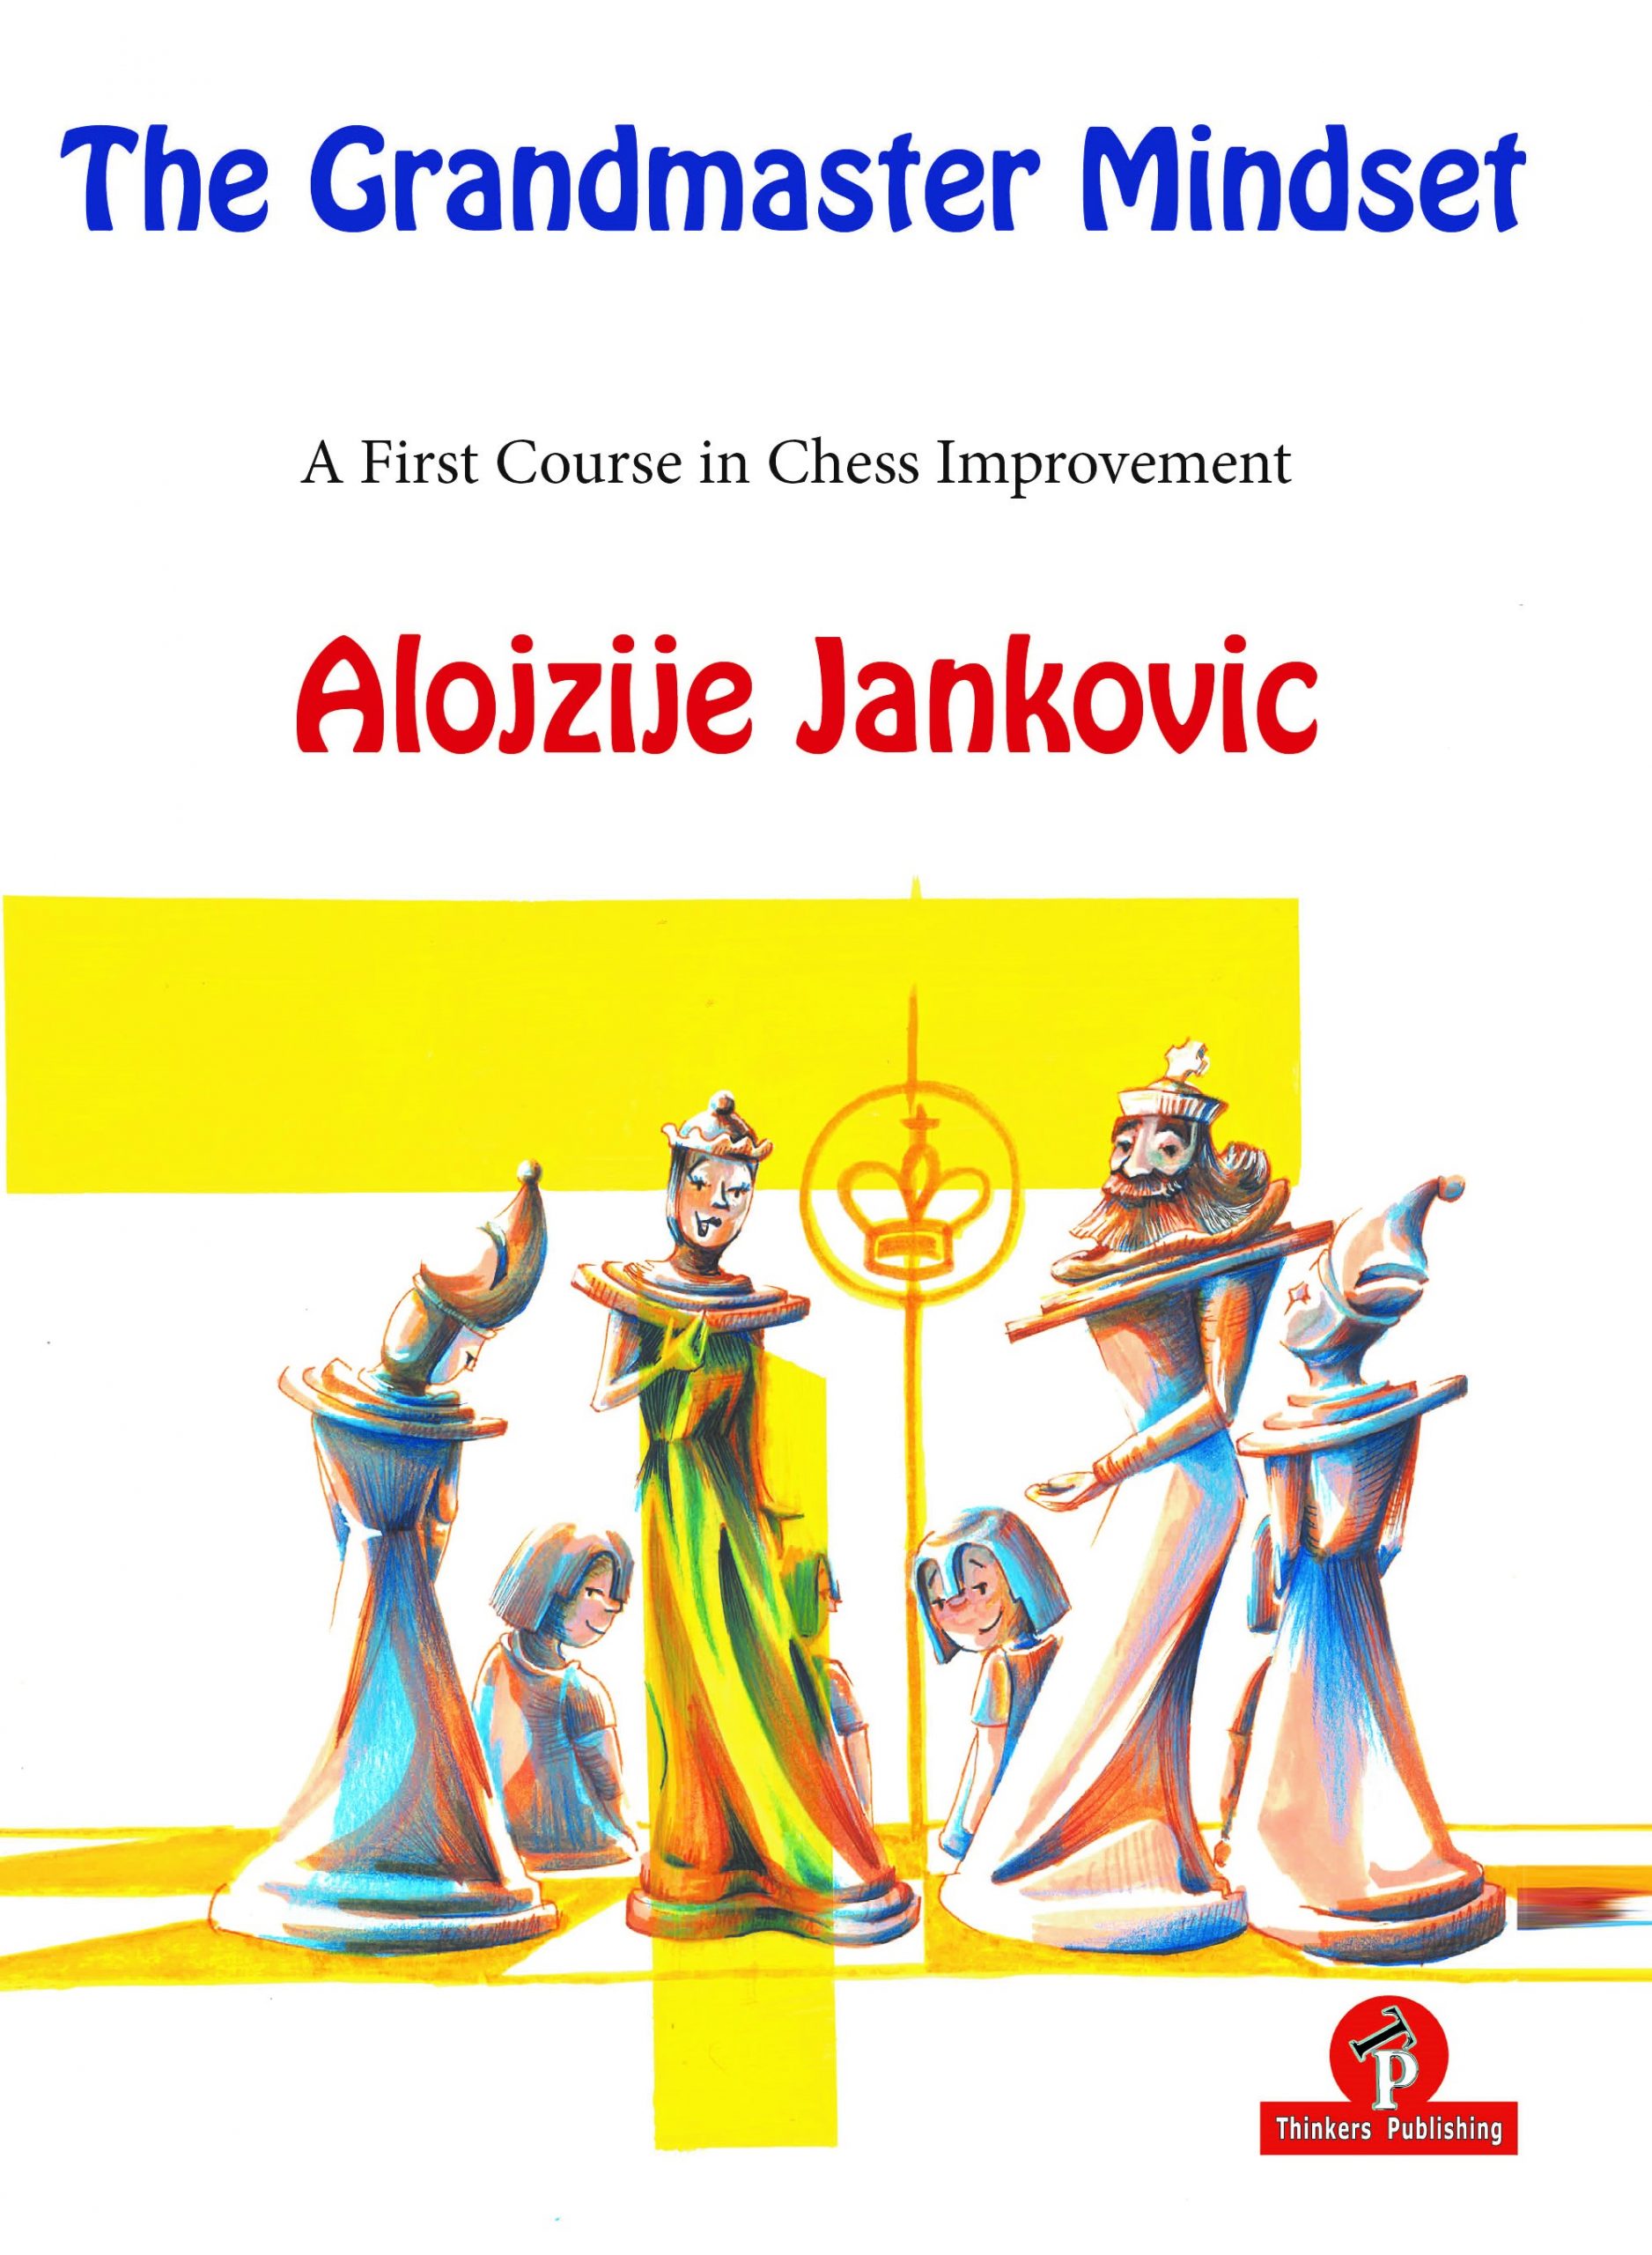 What is a good book for learning chess strategies? - Quora